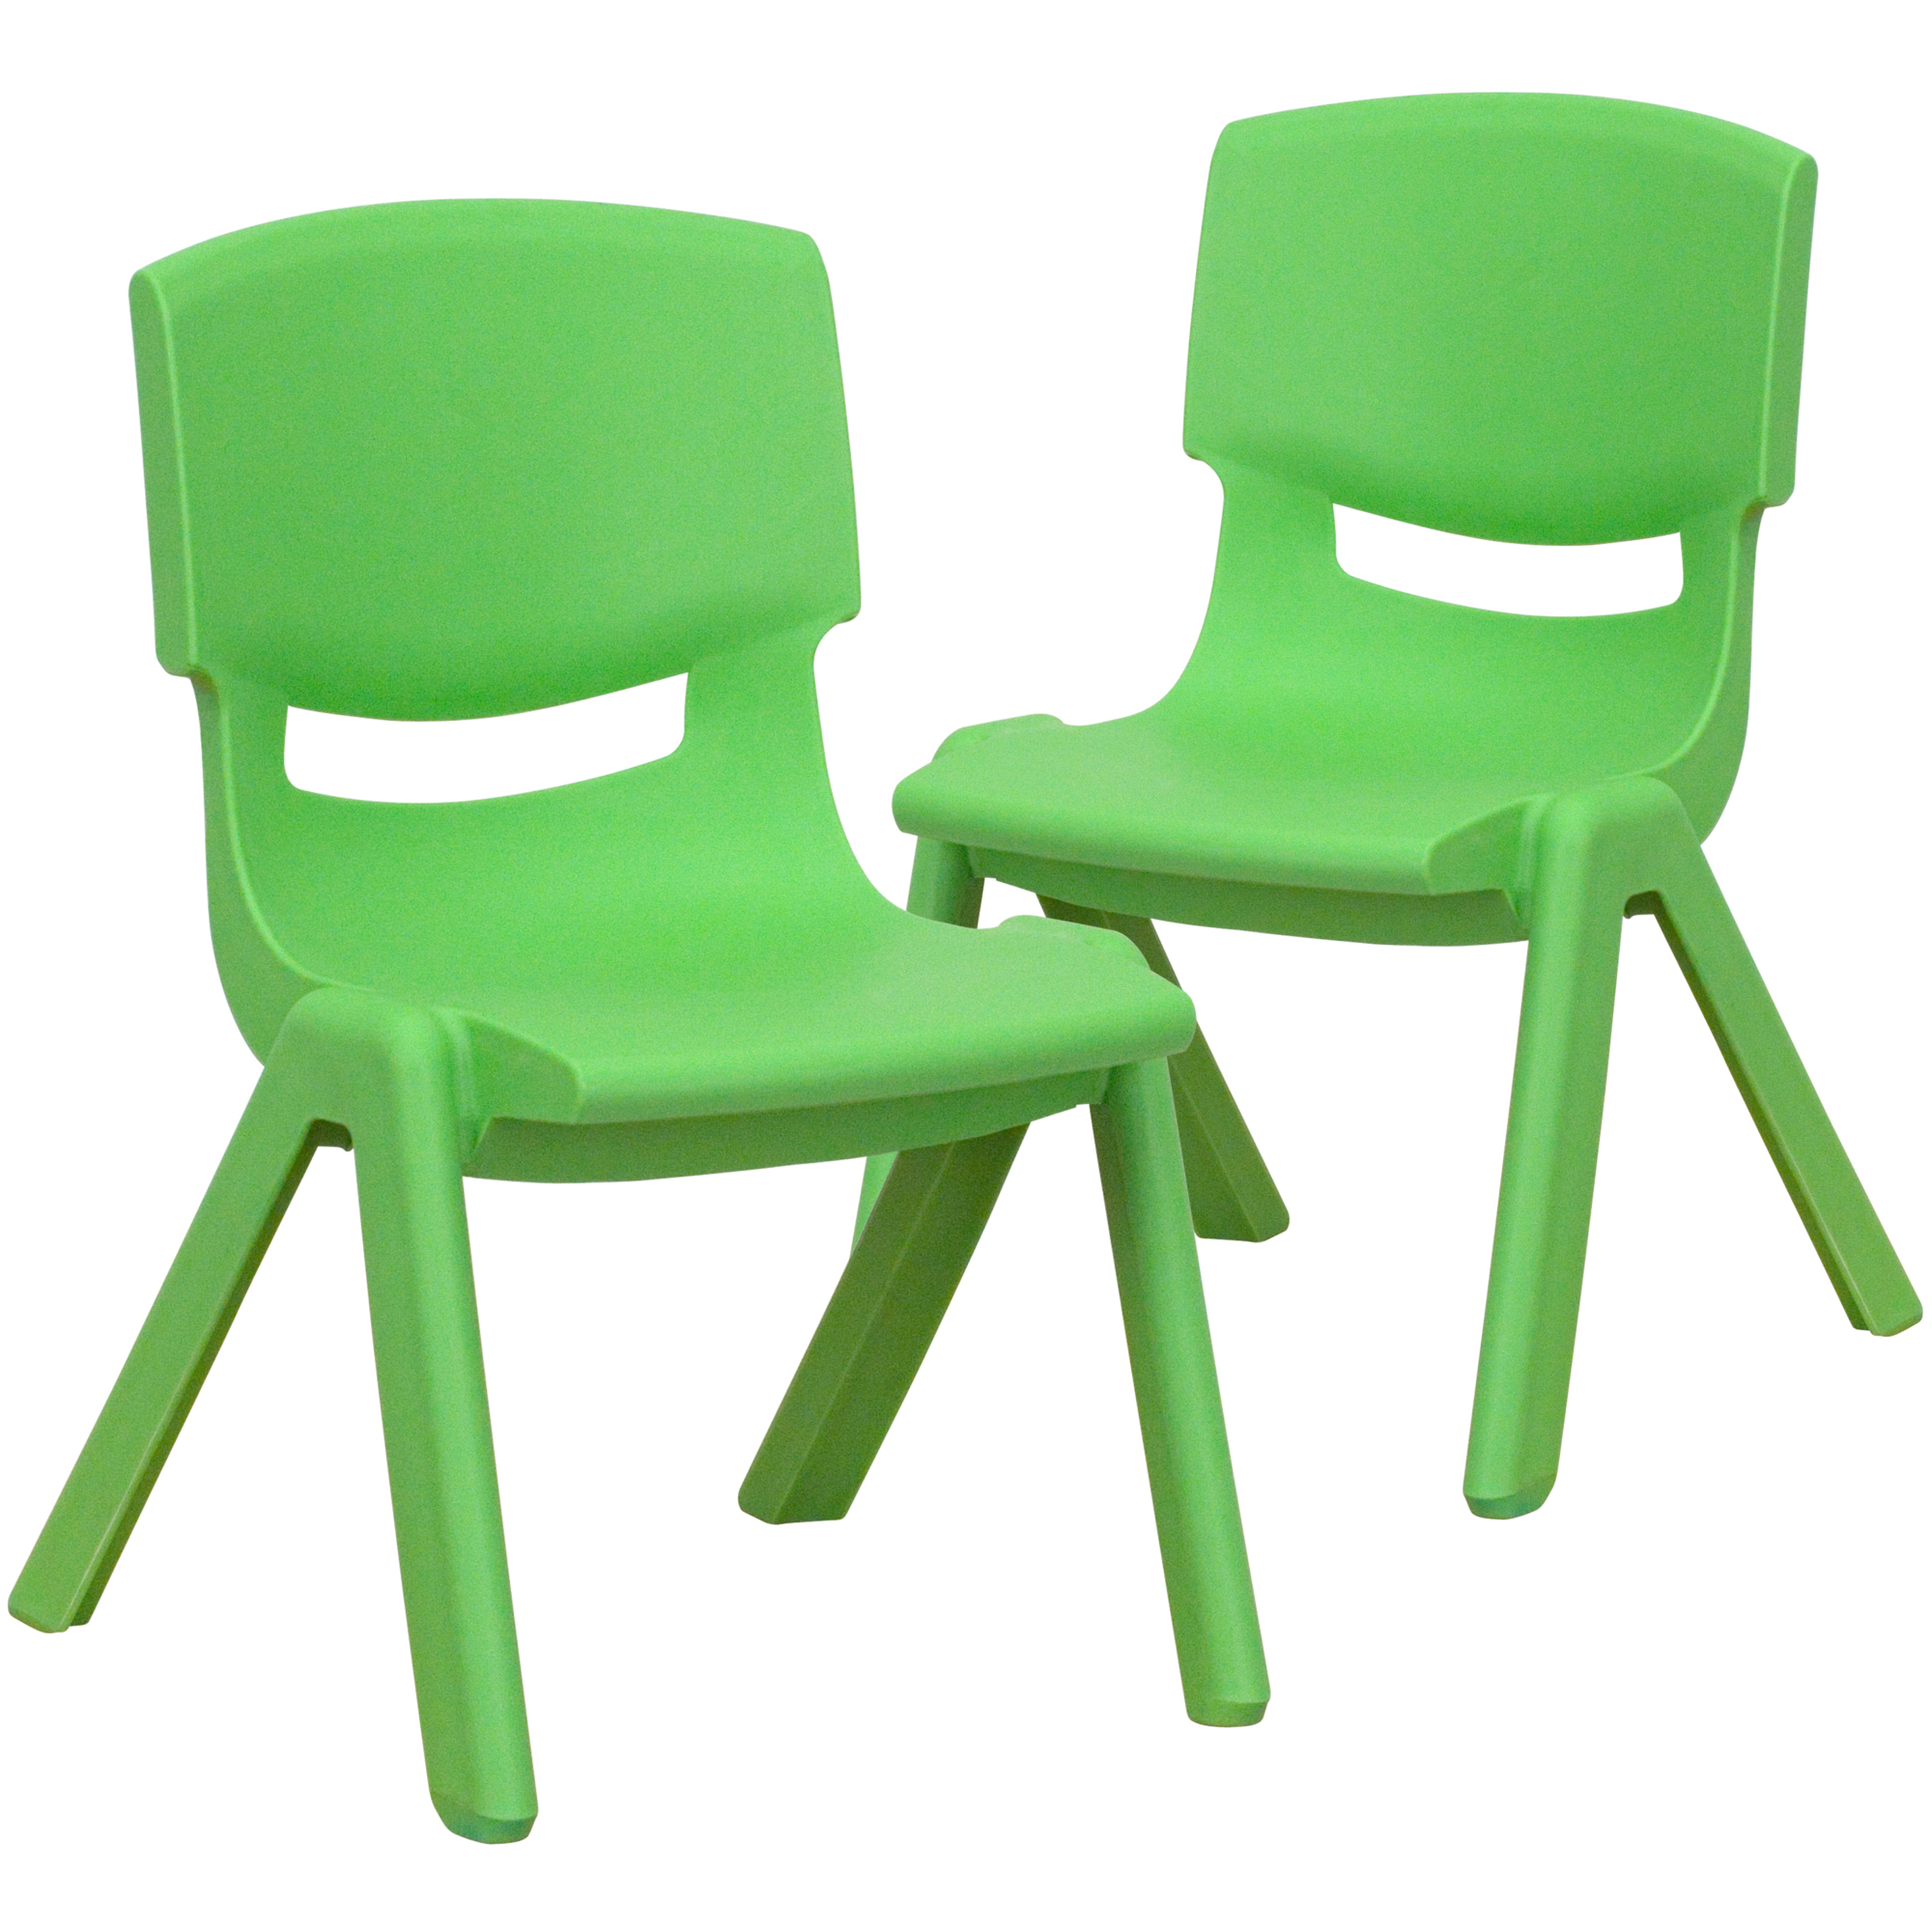 Flash Furniture, 2 Pack Green Plastic School Chair-10.5Inch H Seat, Primary Color Green, Included (qty.) 2, Model 2YUYCX003GREEN